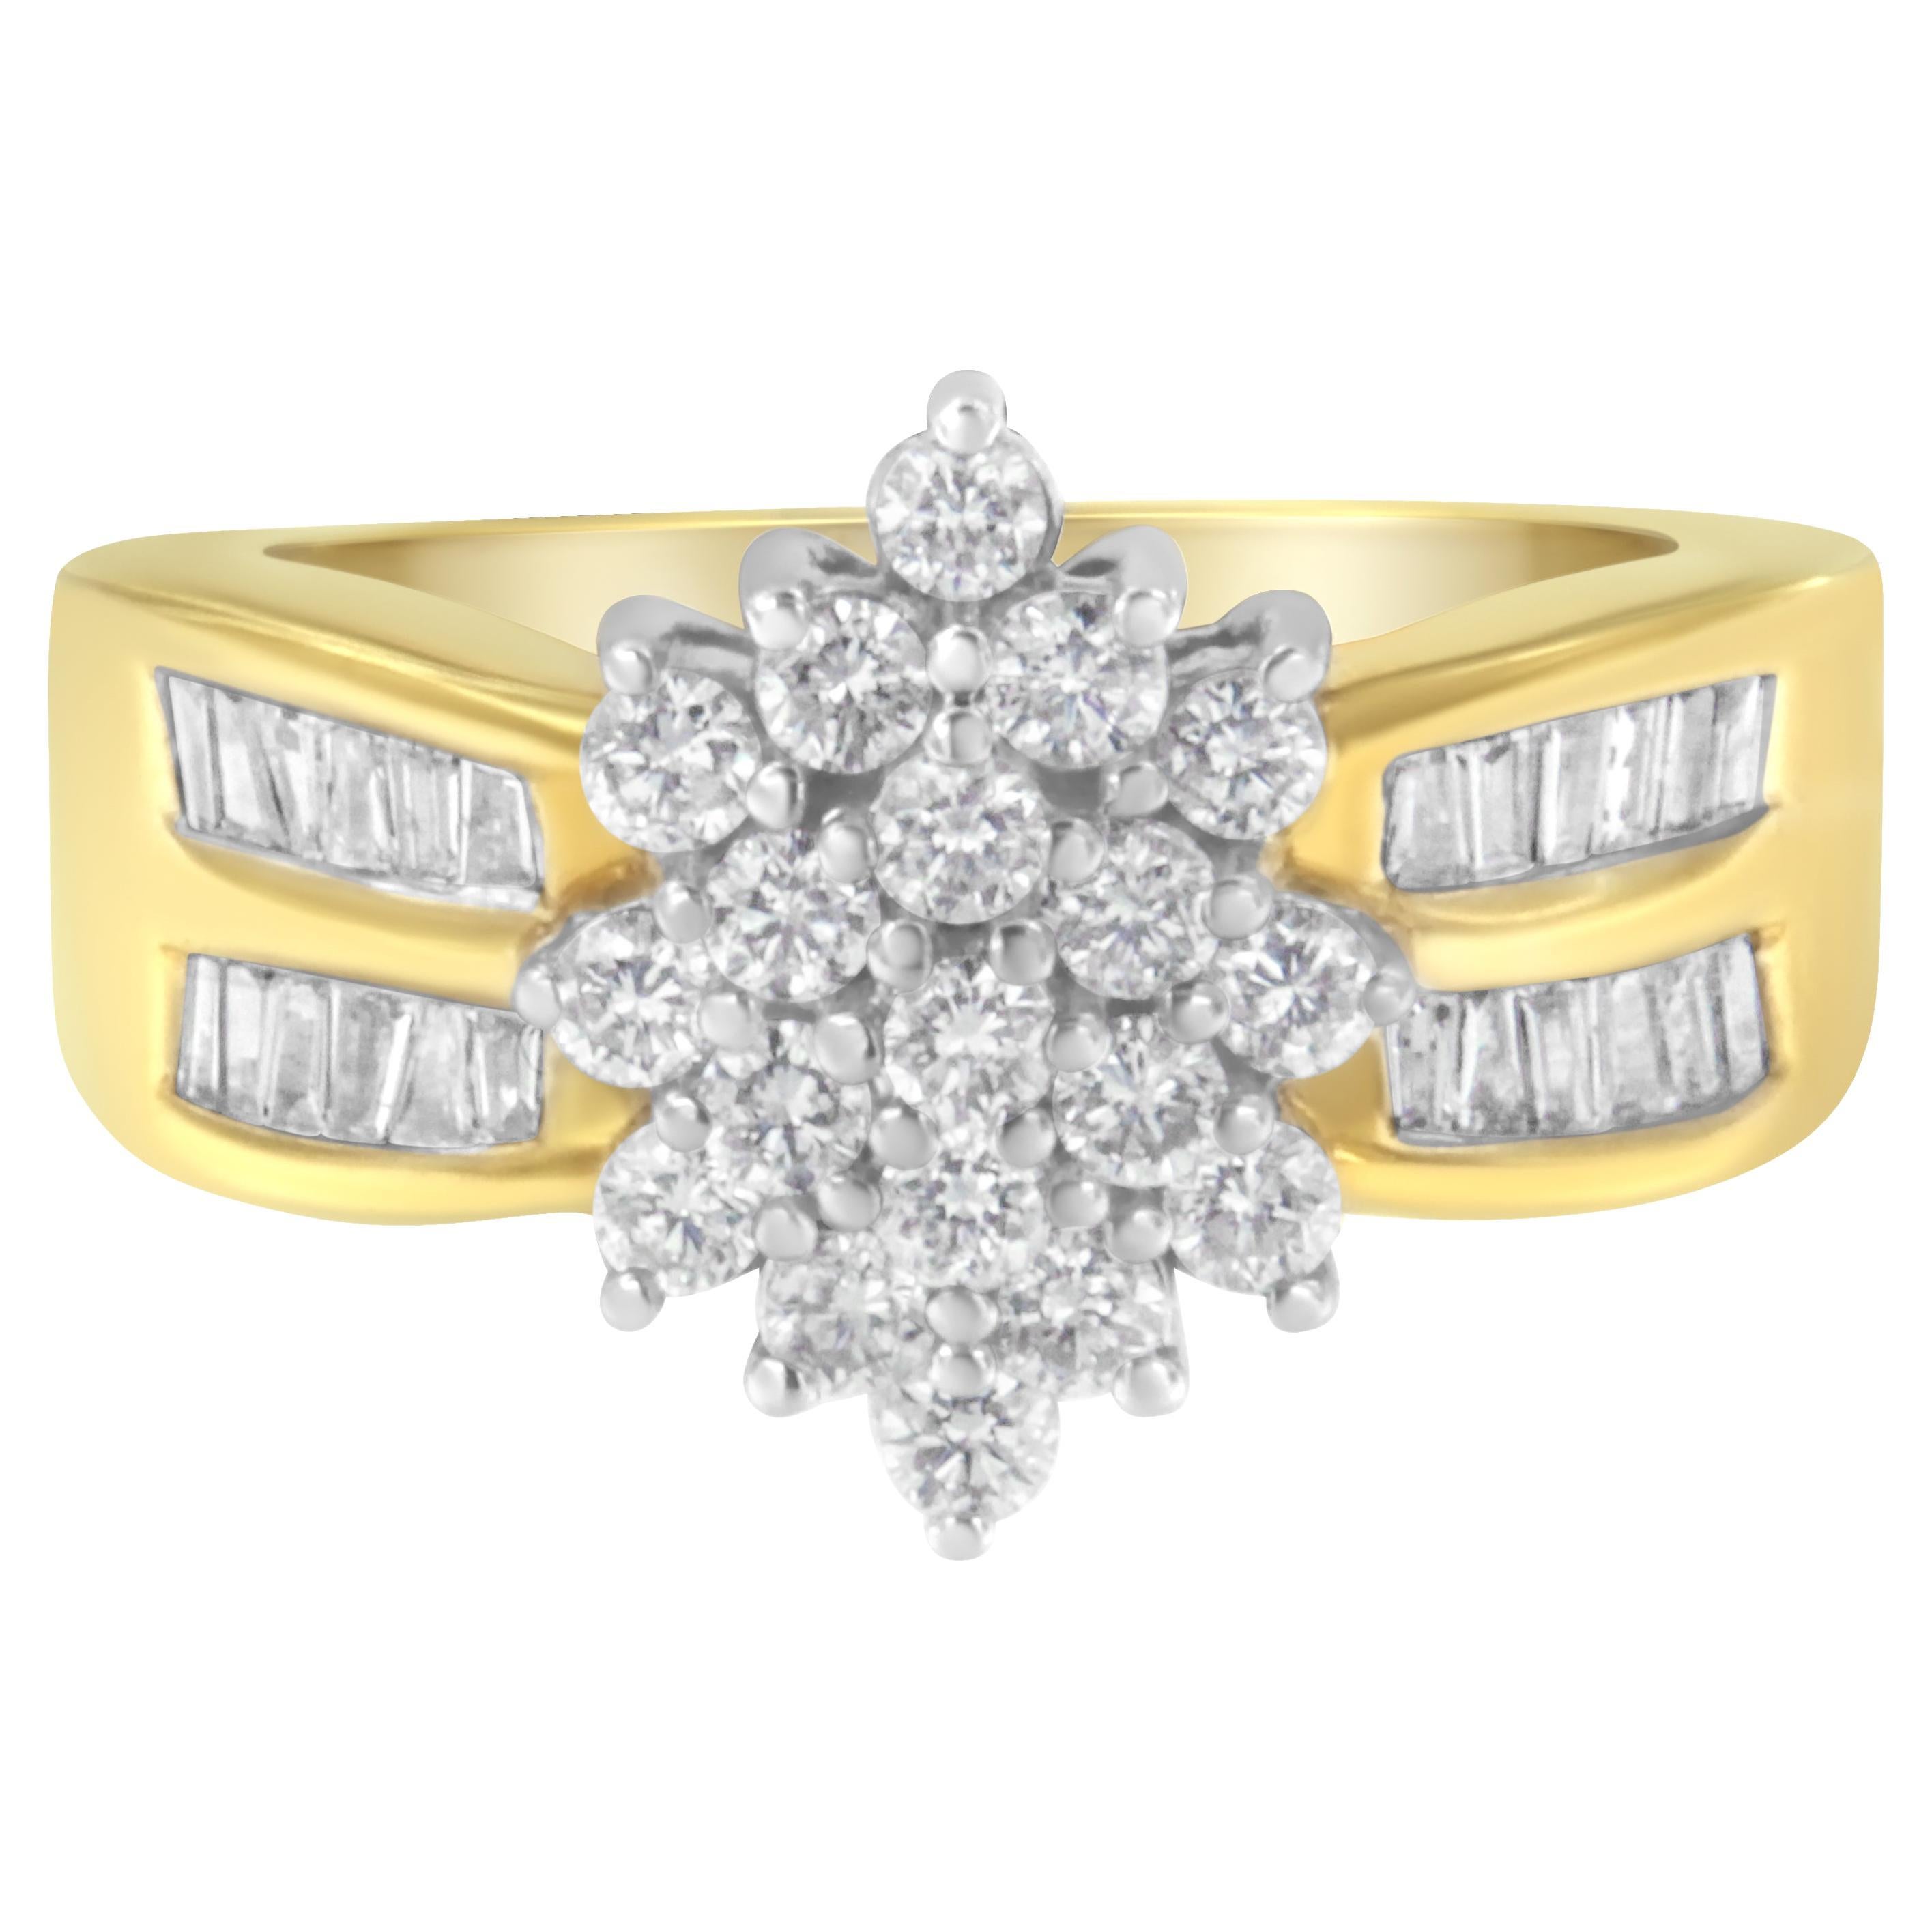 10K Yellow Gold 1.00 Carat Round and Baguette-Cut Diamond Floral Cluster Ring